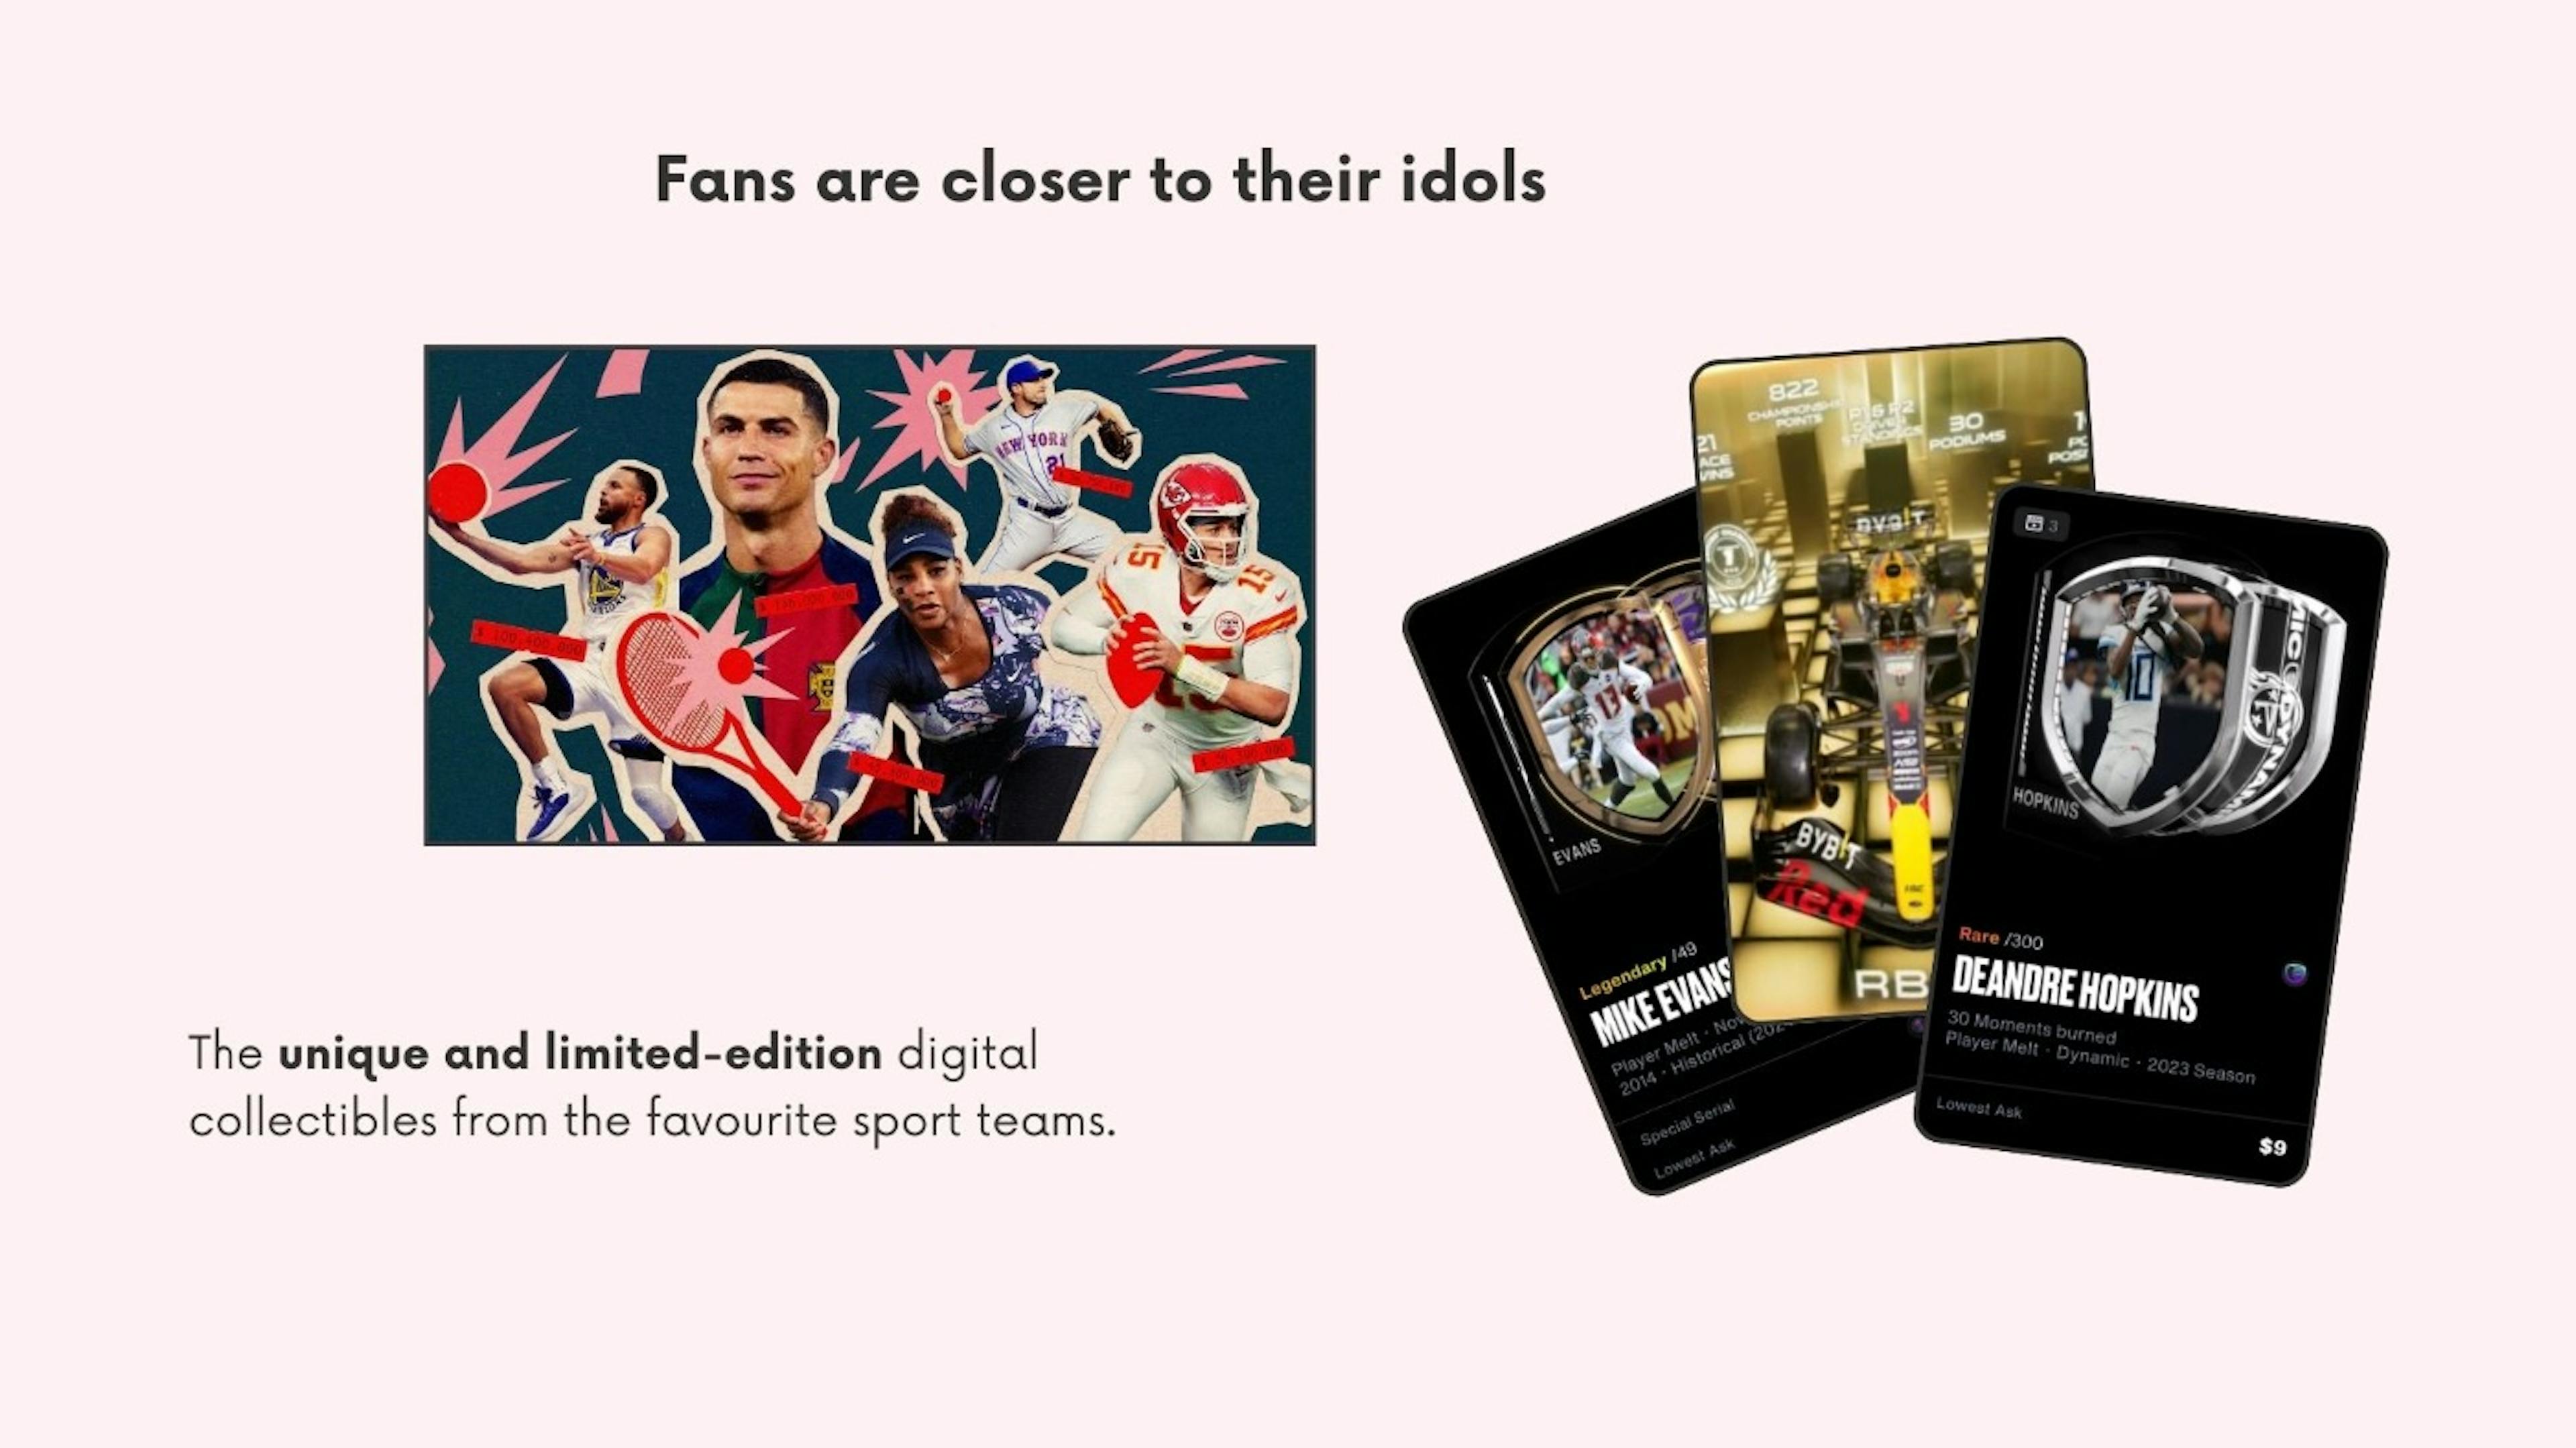 Are you a fan of any sports team?